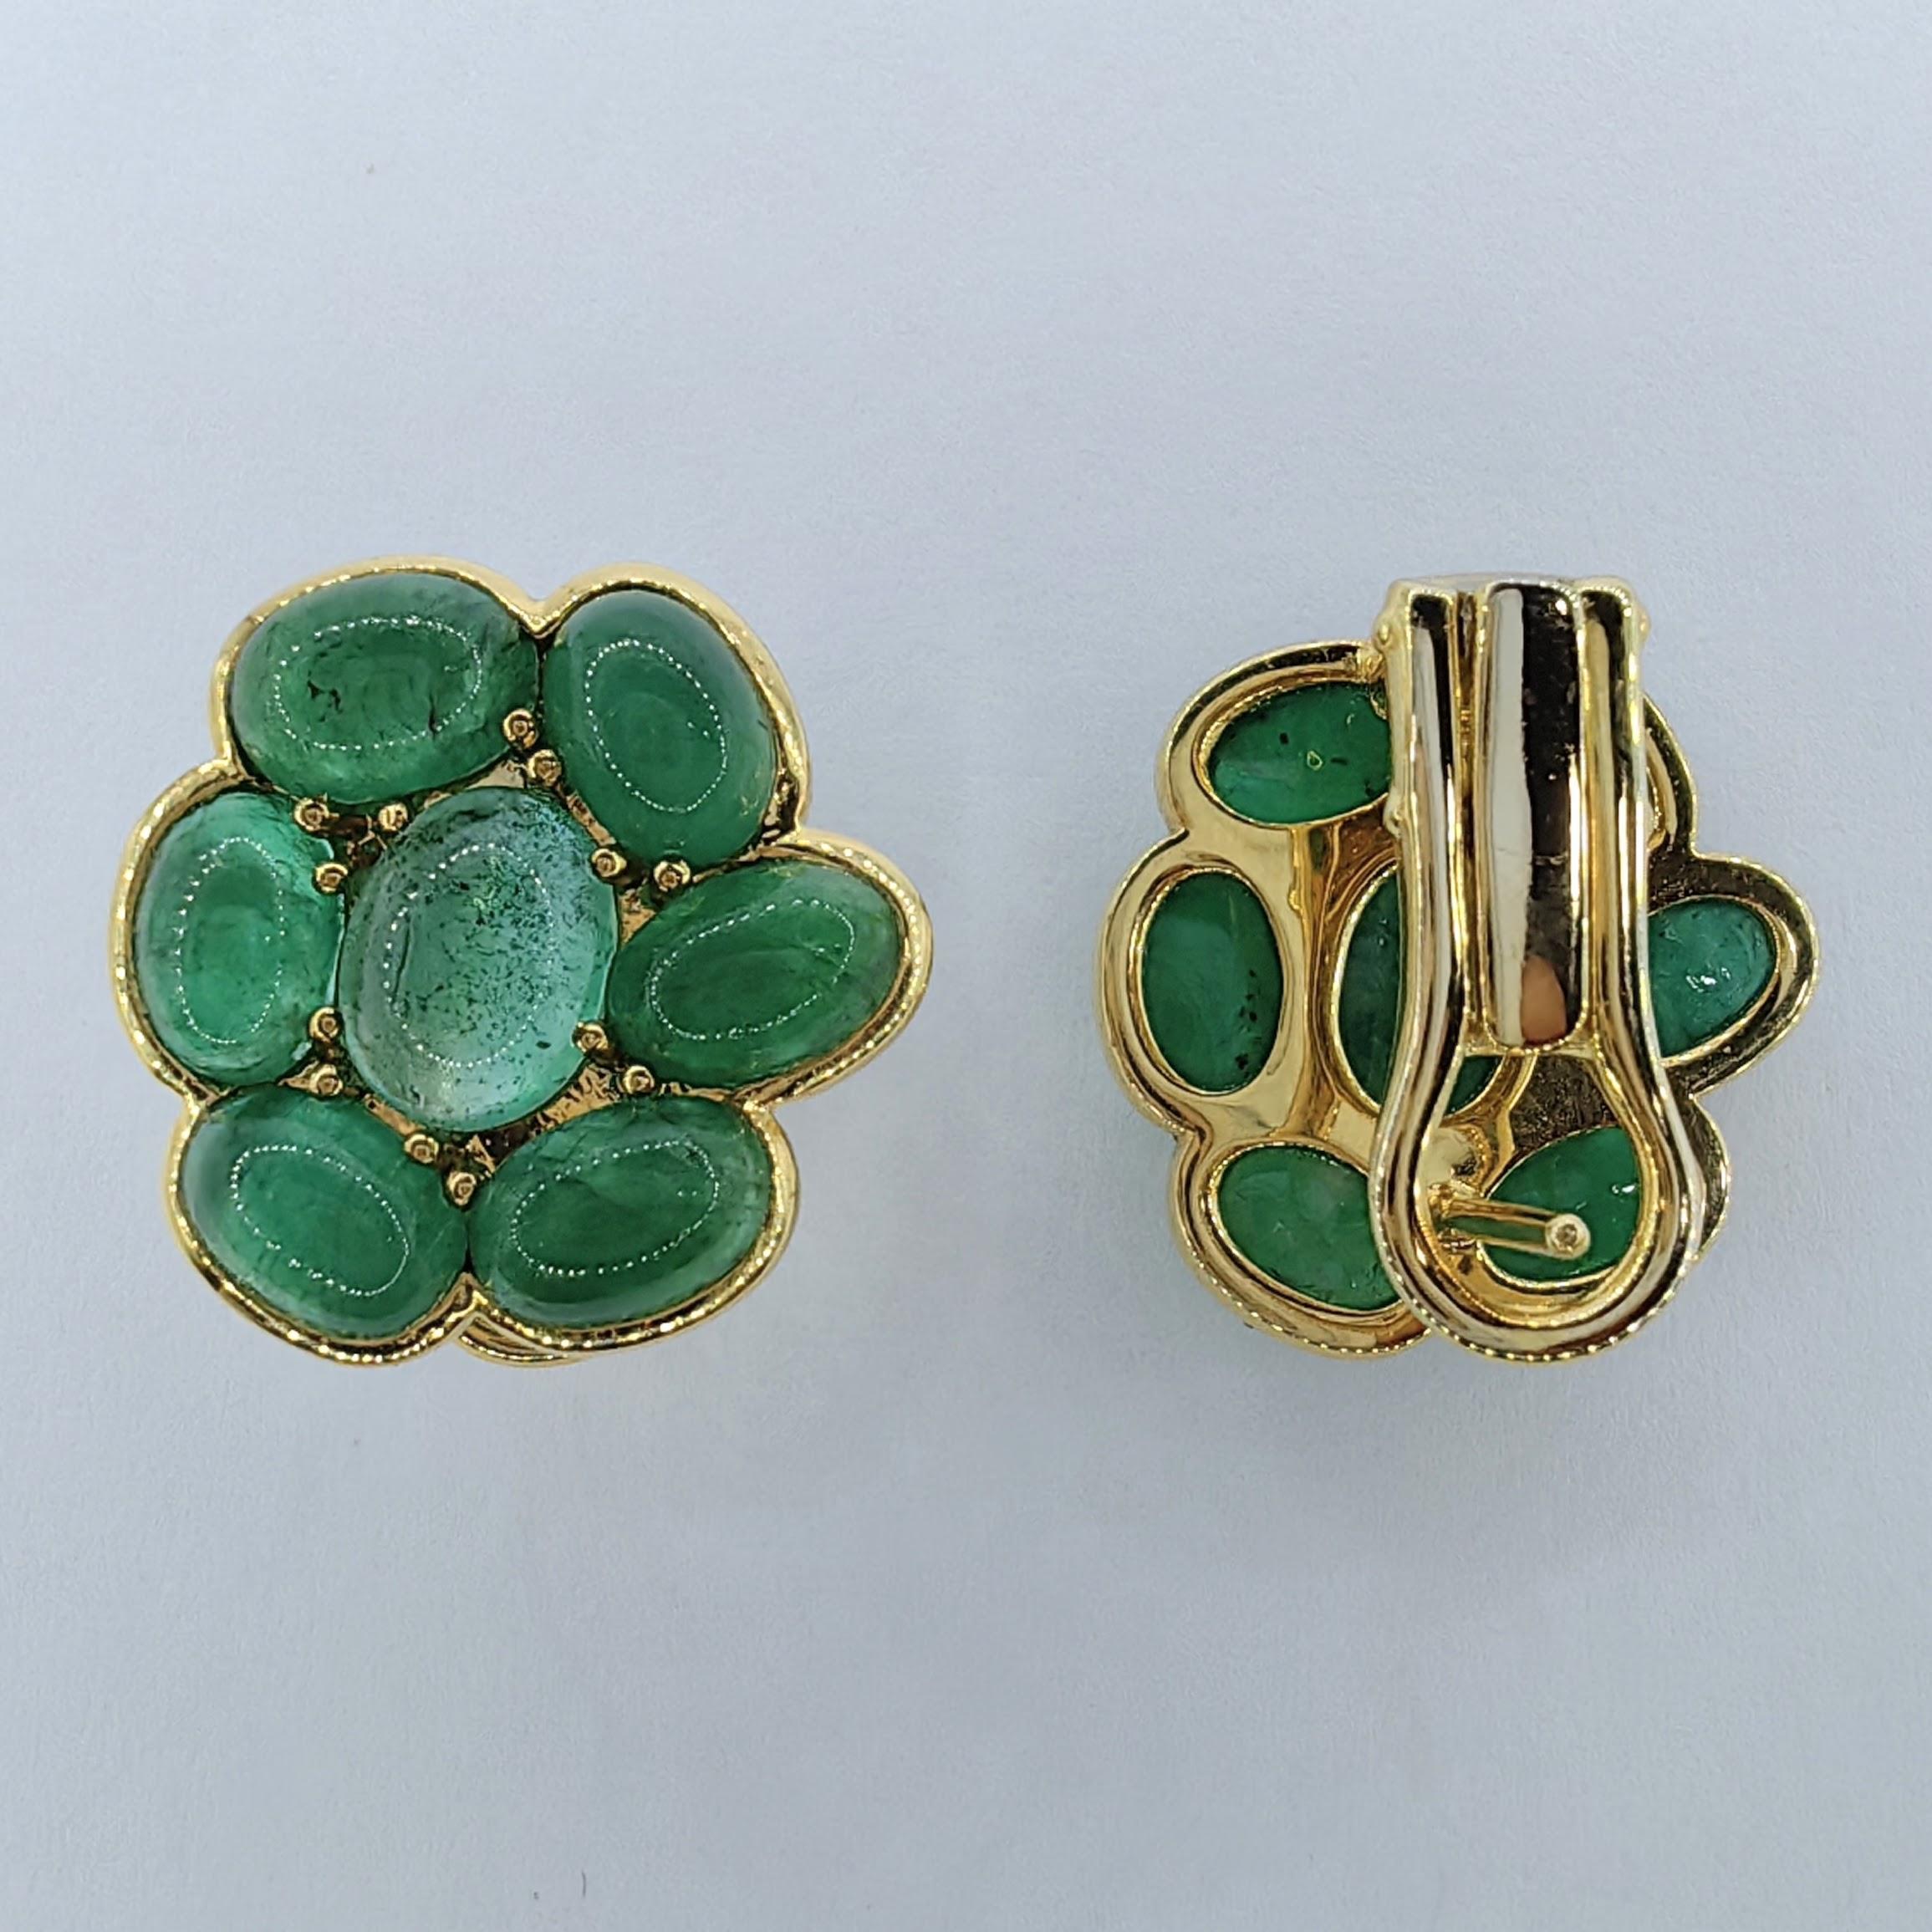 8 Carat Cabochon Emerald Cluster Flower Earrings in 18K Yellow Gold For Sale 1